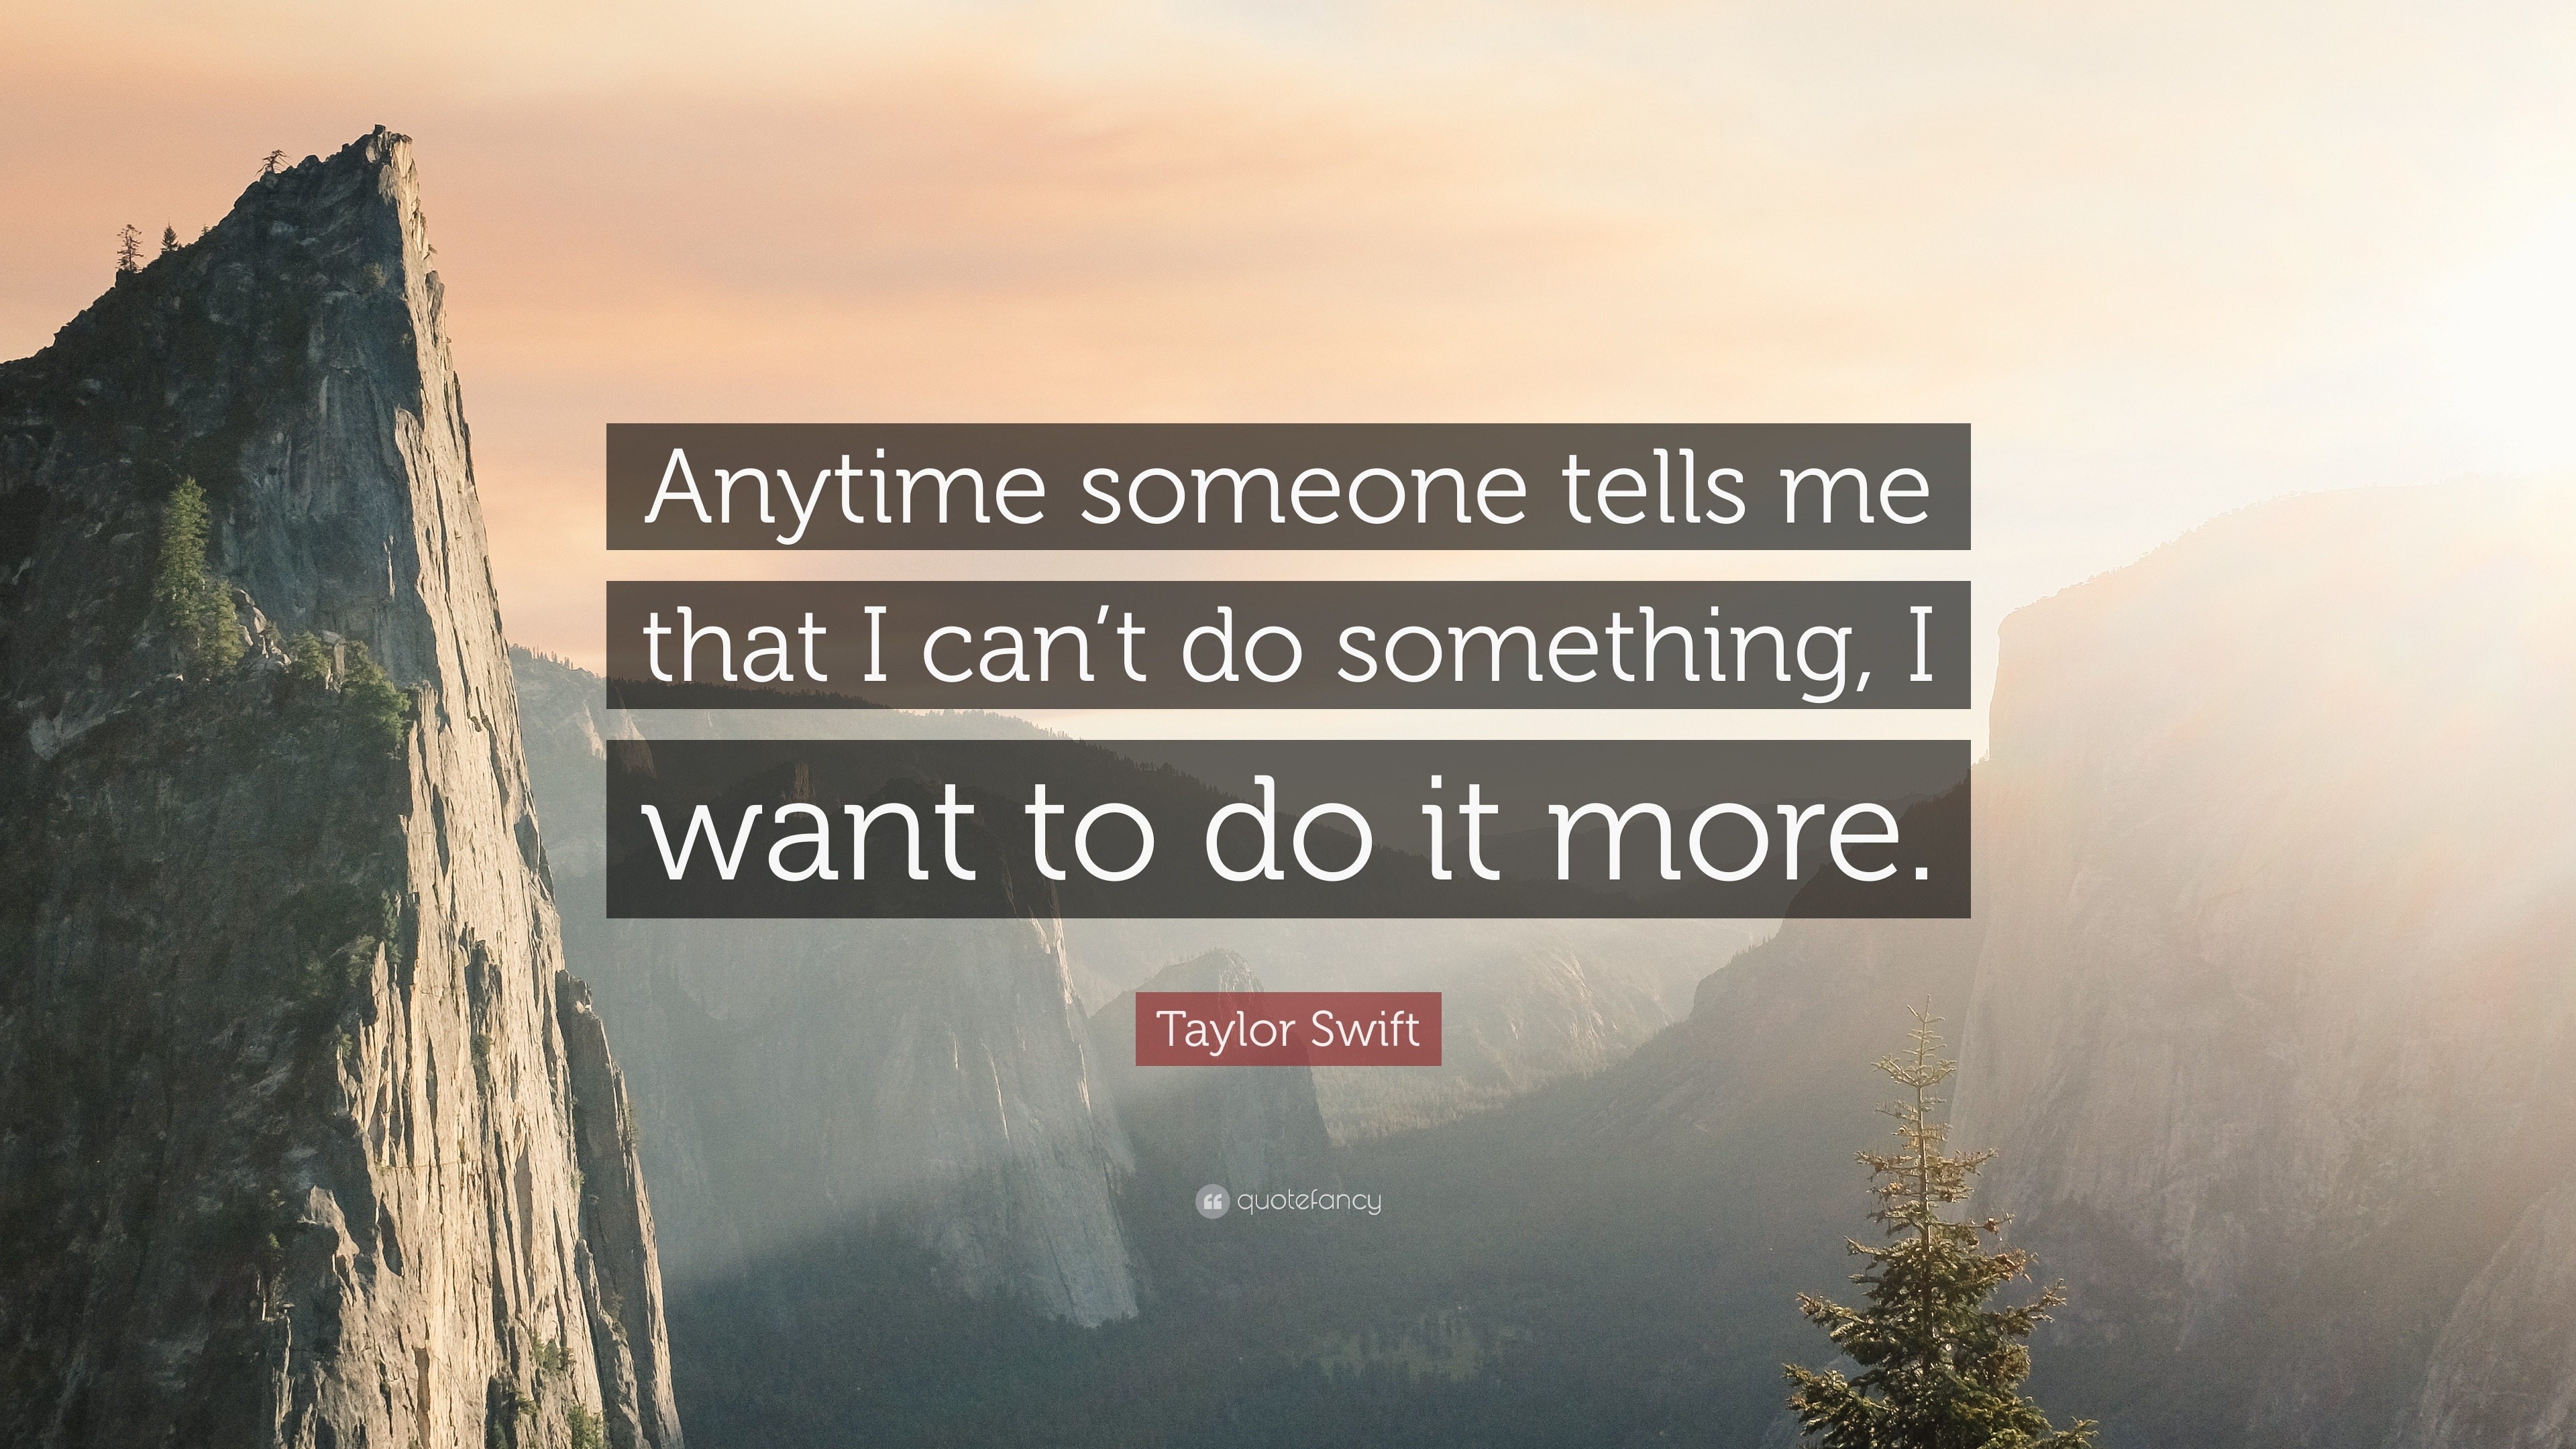 Taylor Swift Quote Anytime Someone Tells Me That I Can T Do Something I Want To